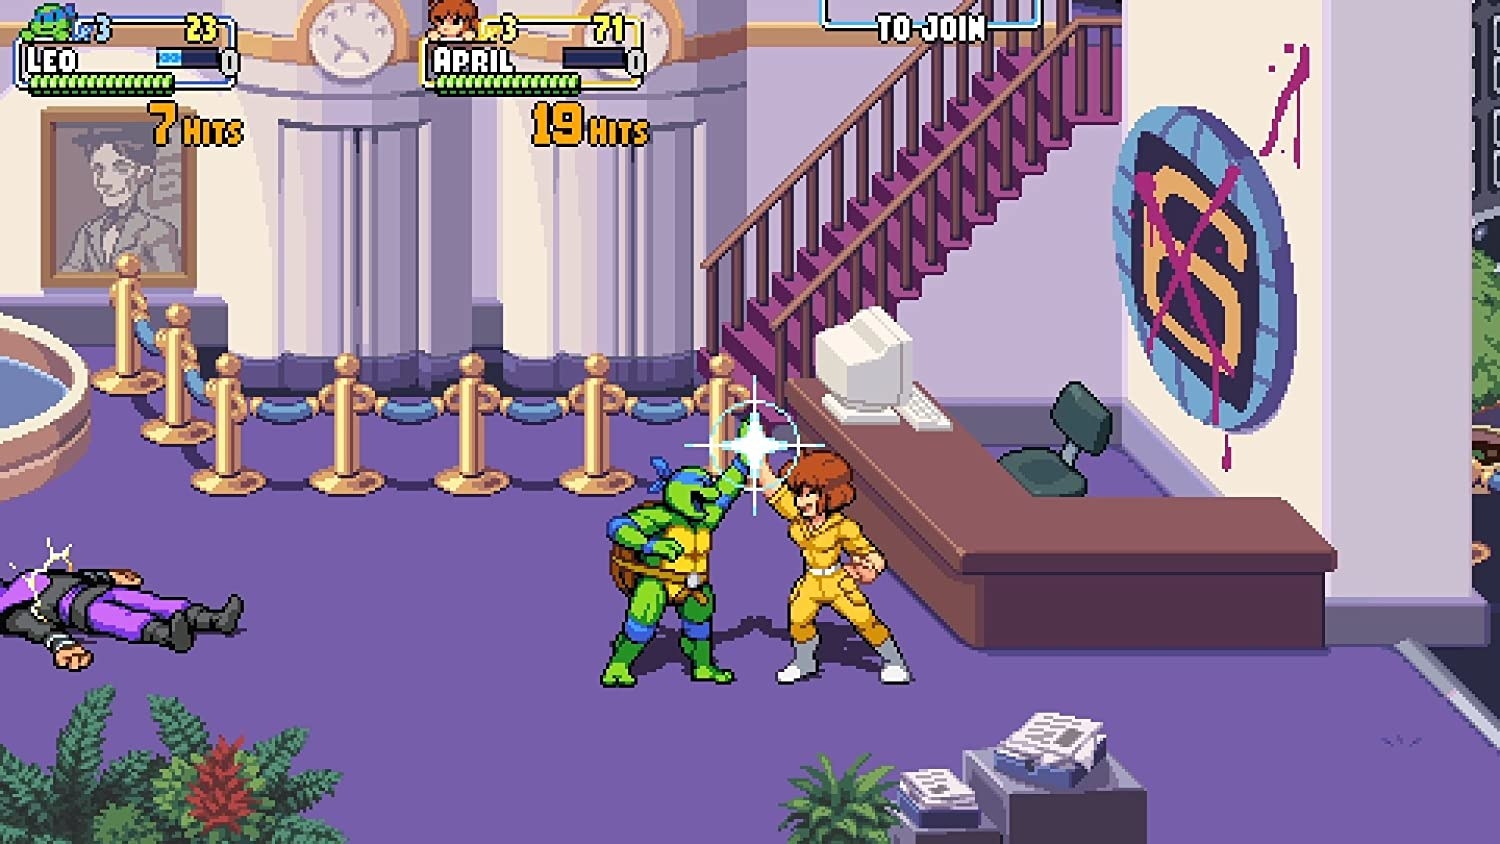 a screenshot of a fight scene in an office building